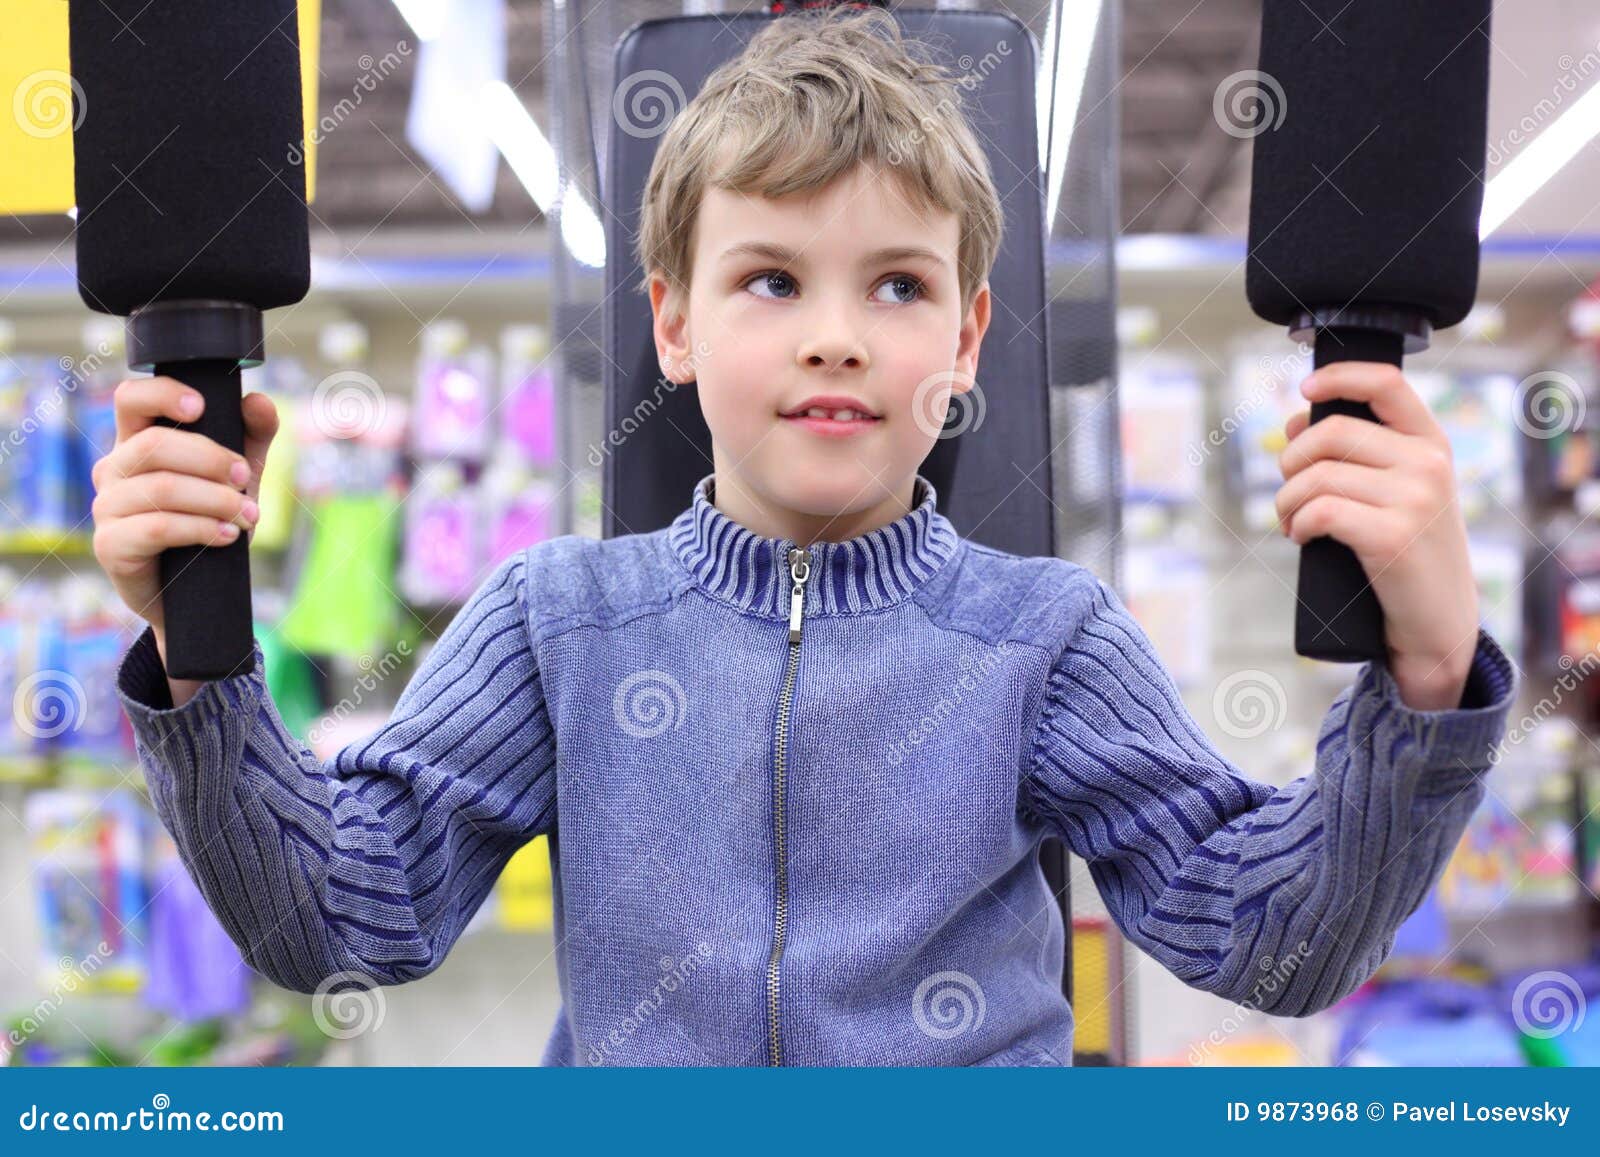 boy in shop on sports exerciser